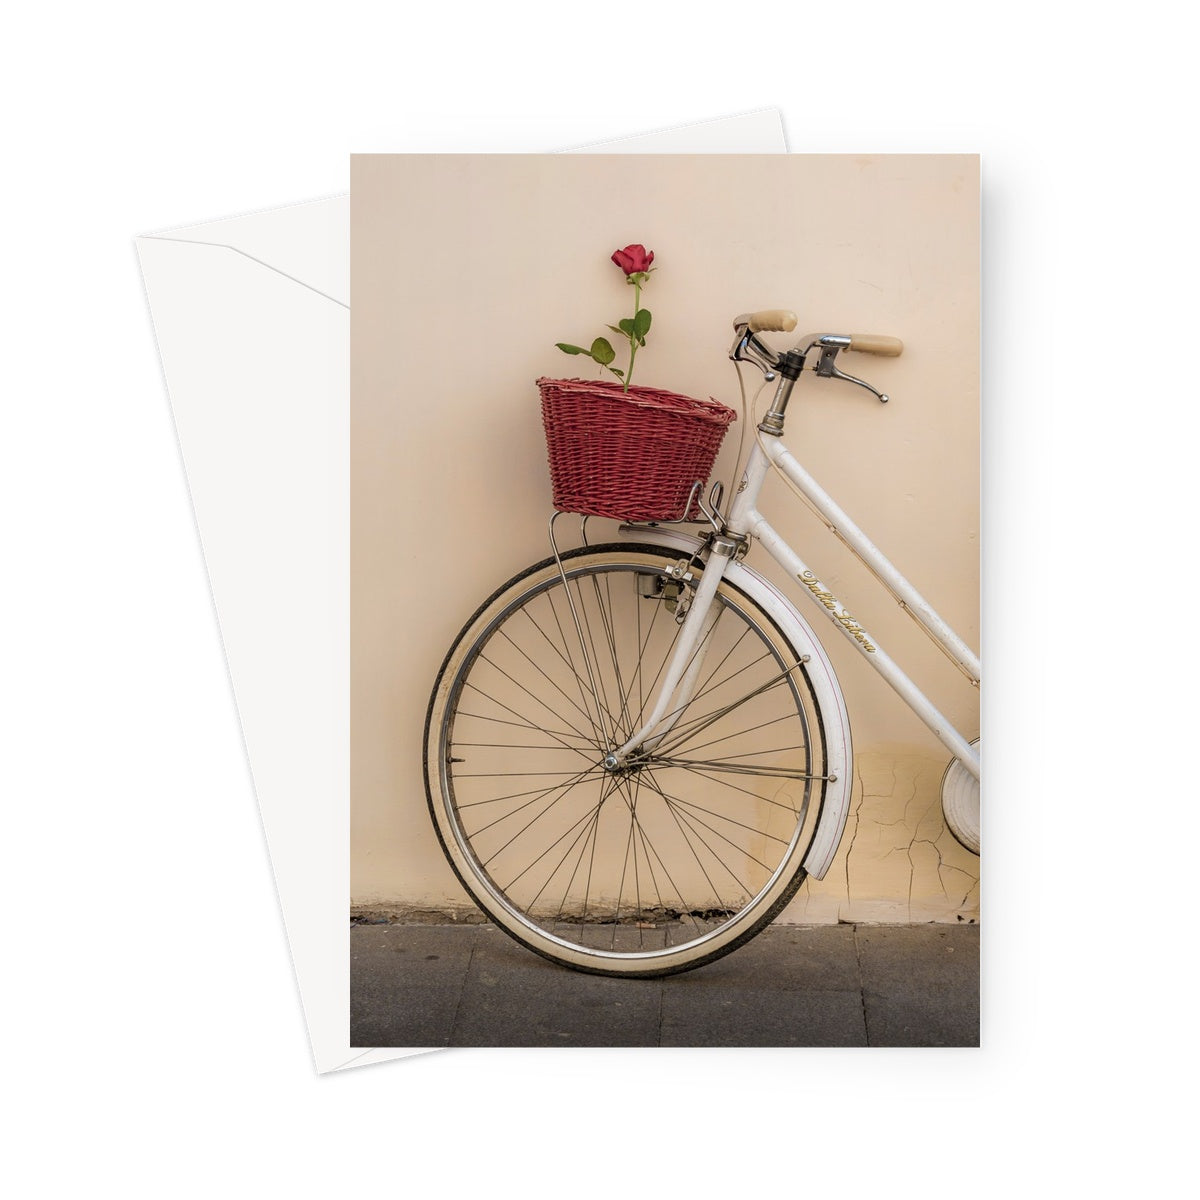 White bicycle parked against a  rendered wall with a red rose in its basket, Rome, Italy. Greeting Card